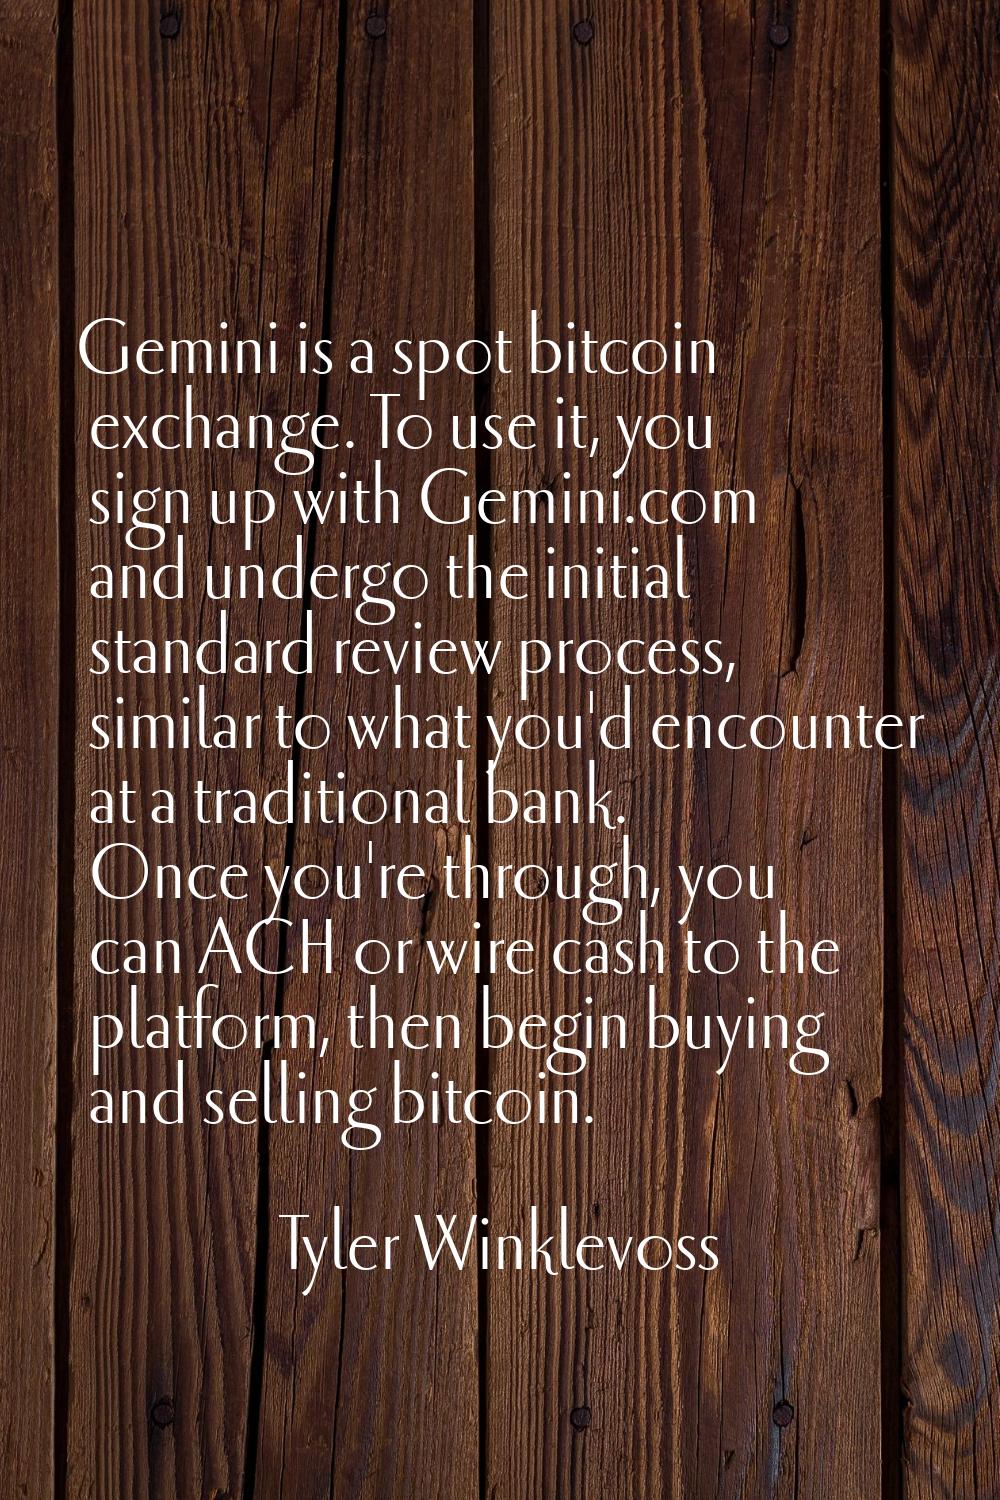 Gemini is a spot bitcoin exchange. To use it, you sign up with Gemini.com and undergo the initial s